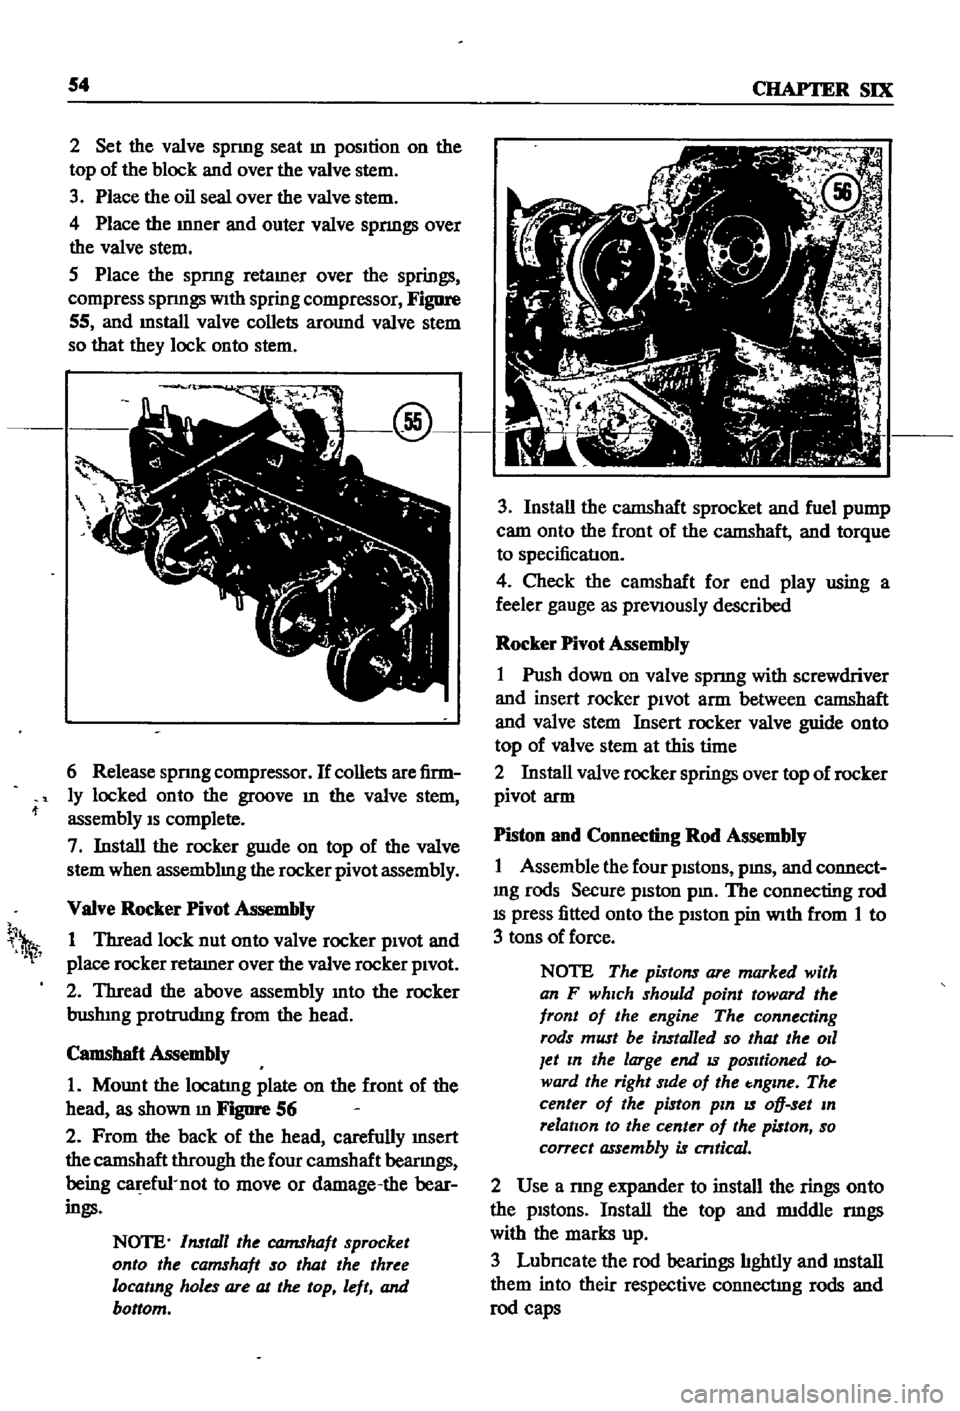 DATSUN 510 1968  Service Repair Manual 
54

CHAP1ER 
SIX

2 
Set 
the 
valve

spnng 
seat

m

position 
on 
the

top 
of 
the 
block 
and

over 
the

valve 
stem

3 
Place 
the 
oil 
seal 
over 
the

valve 
stem

4 
Place 
the

mner 
and

